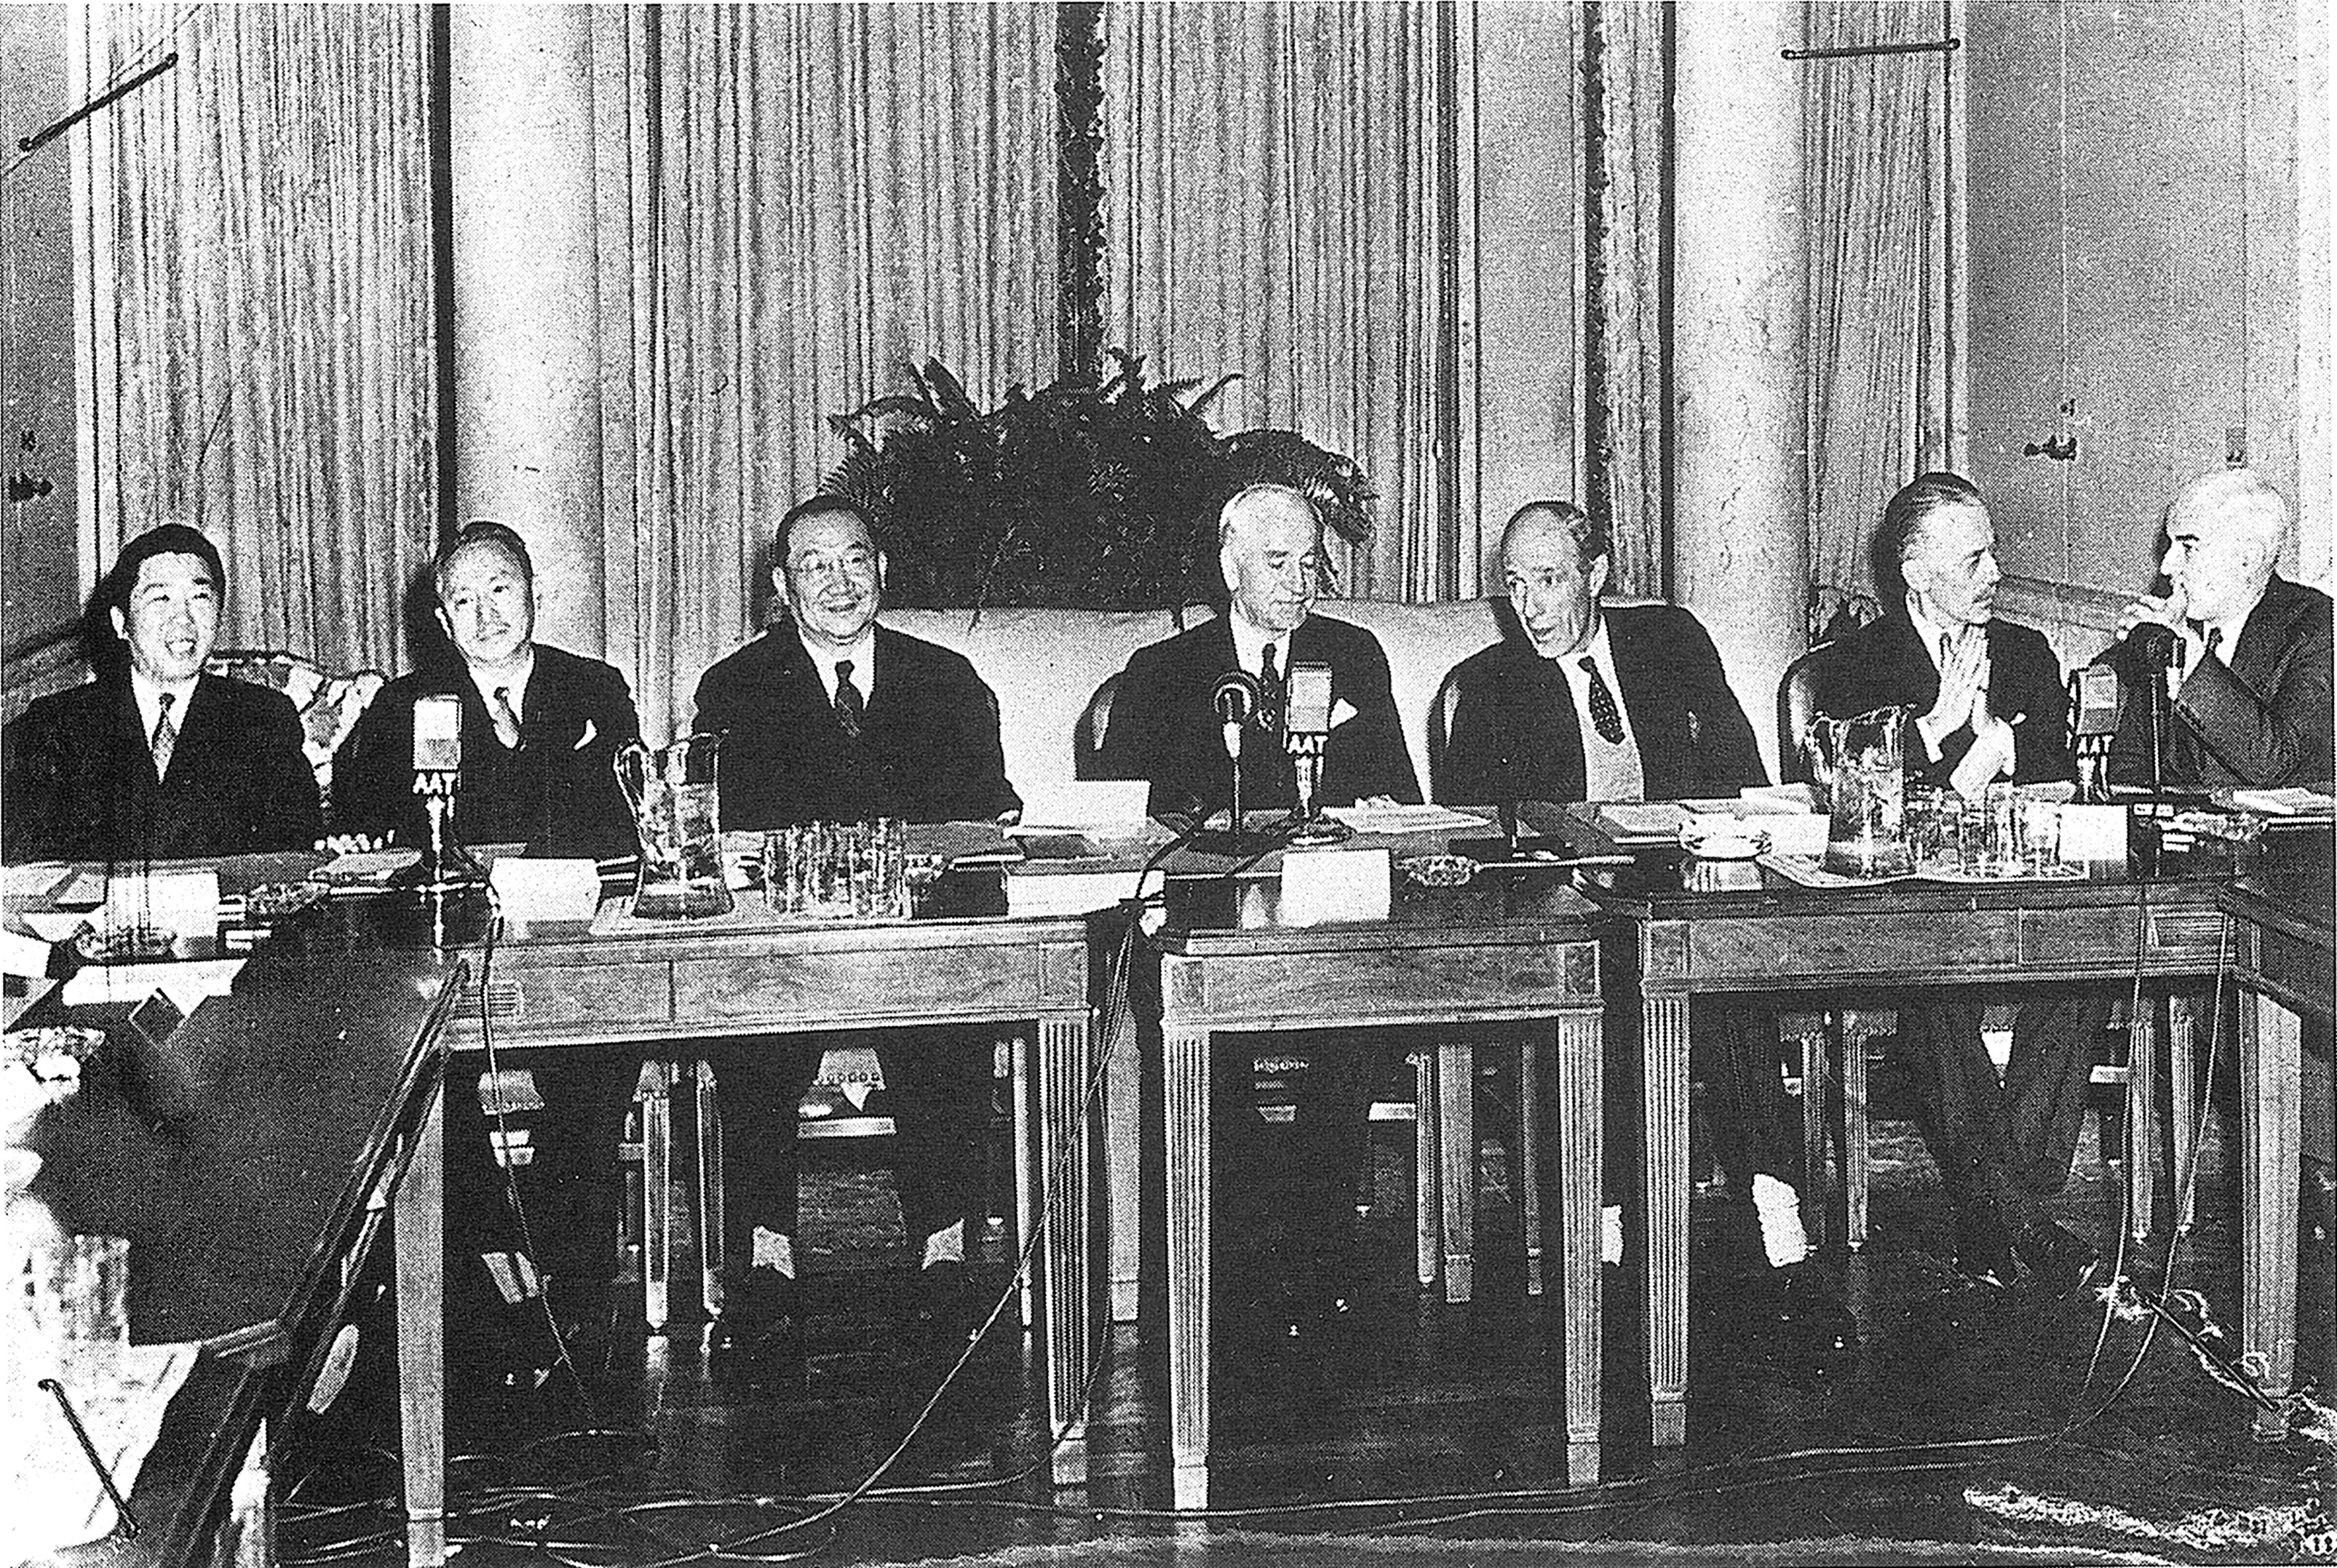 Leading members of the Chinese delegation at the opening of the second phase of the Dumbarton Oaks Conversations, 29 September 1944, together with the American and British delegations